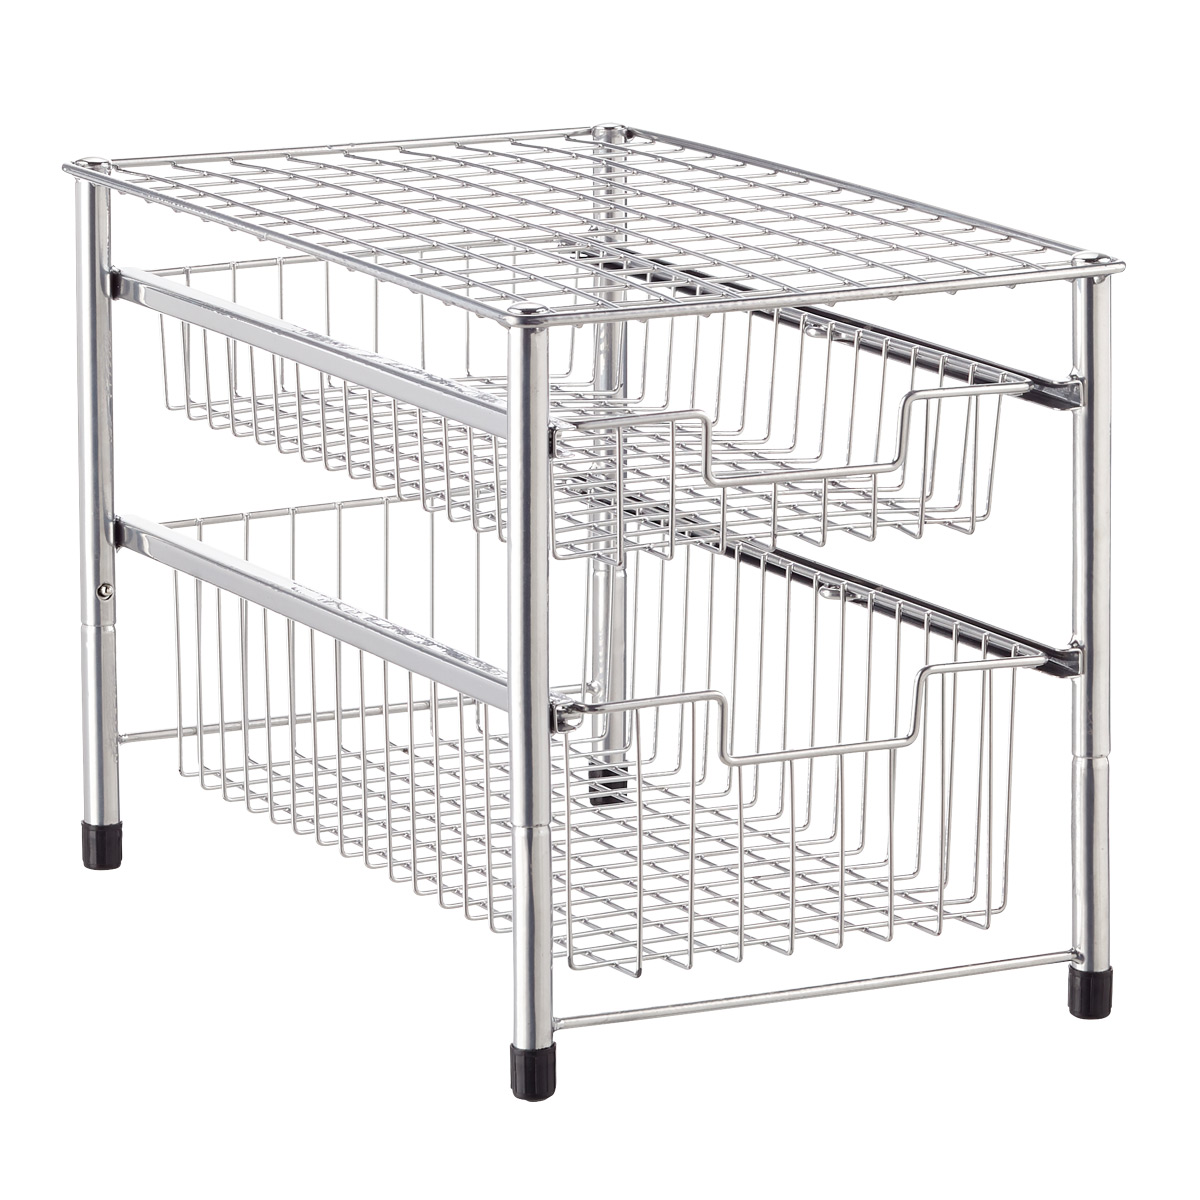 https://www.containerstore.com/catalogimages/372754/10079093-tcs-double-wire-pull-out-ca.jpg